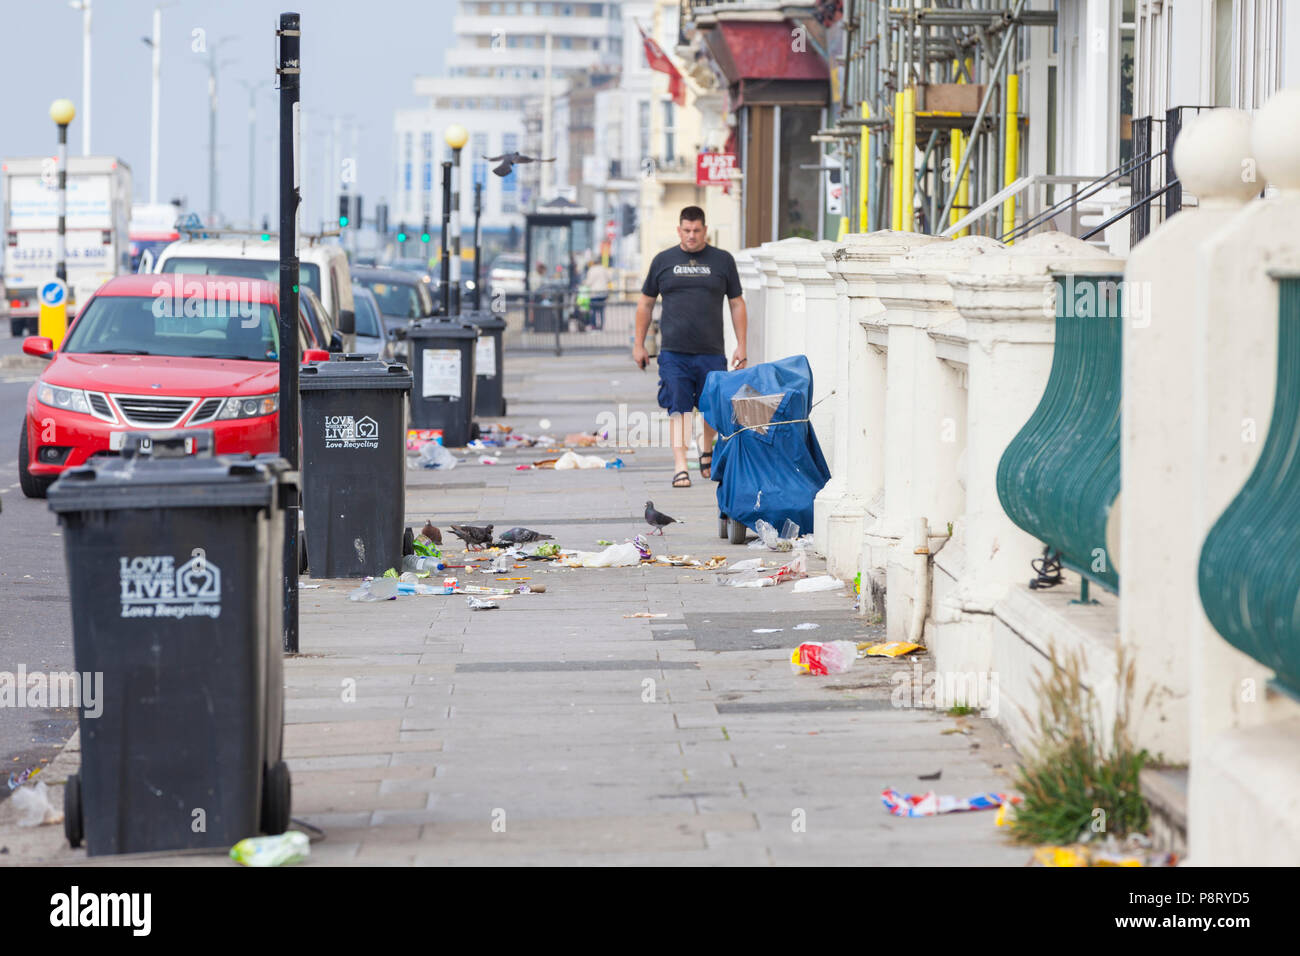 Person walking past a litter strewn street with pigeons picking at rubbish lying on the floor in hastings, east sussex, uk Stock Photo